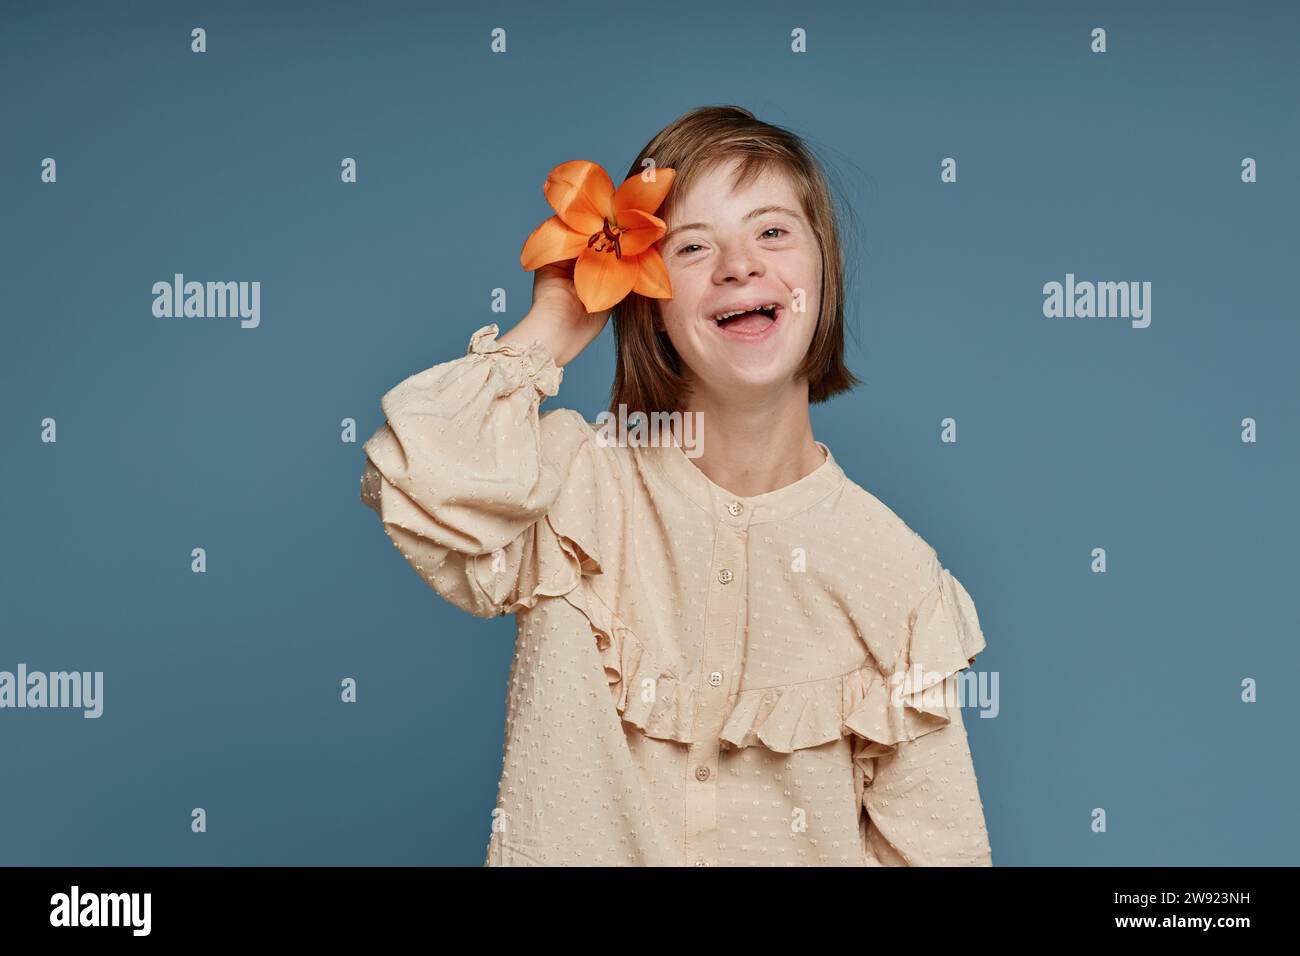 Cheerful teenage girl with Down syndrome with orchid flower against blue background Stock Photo